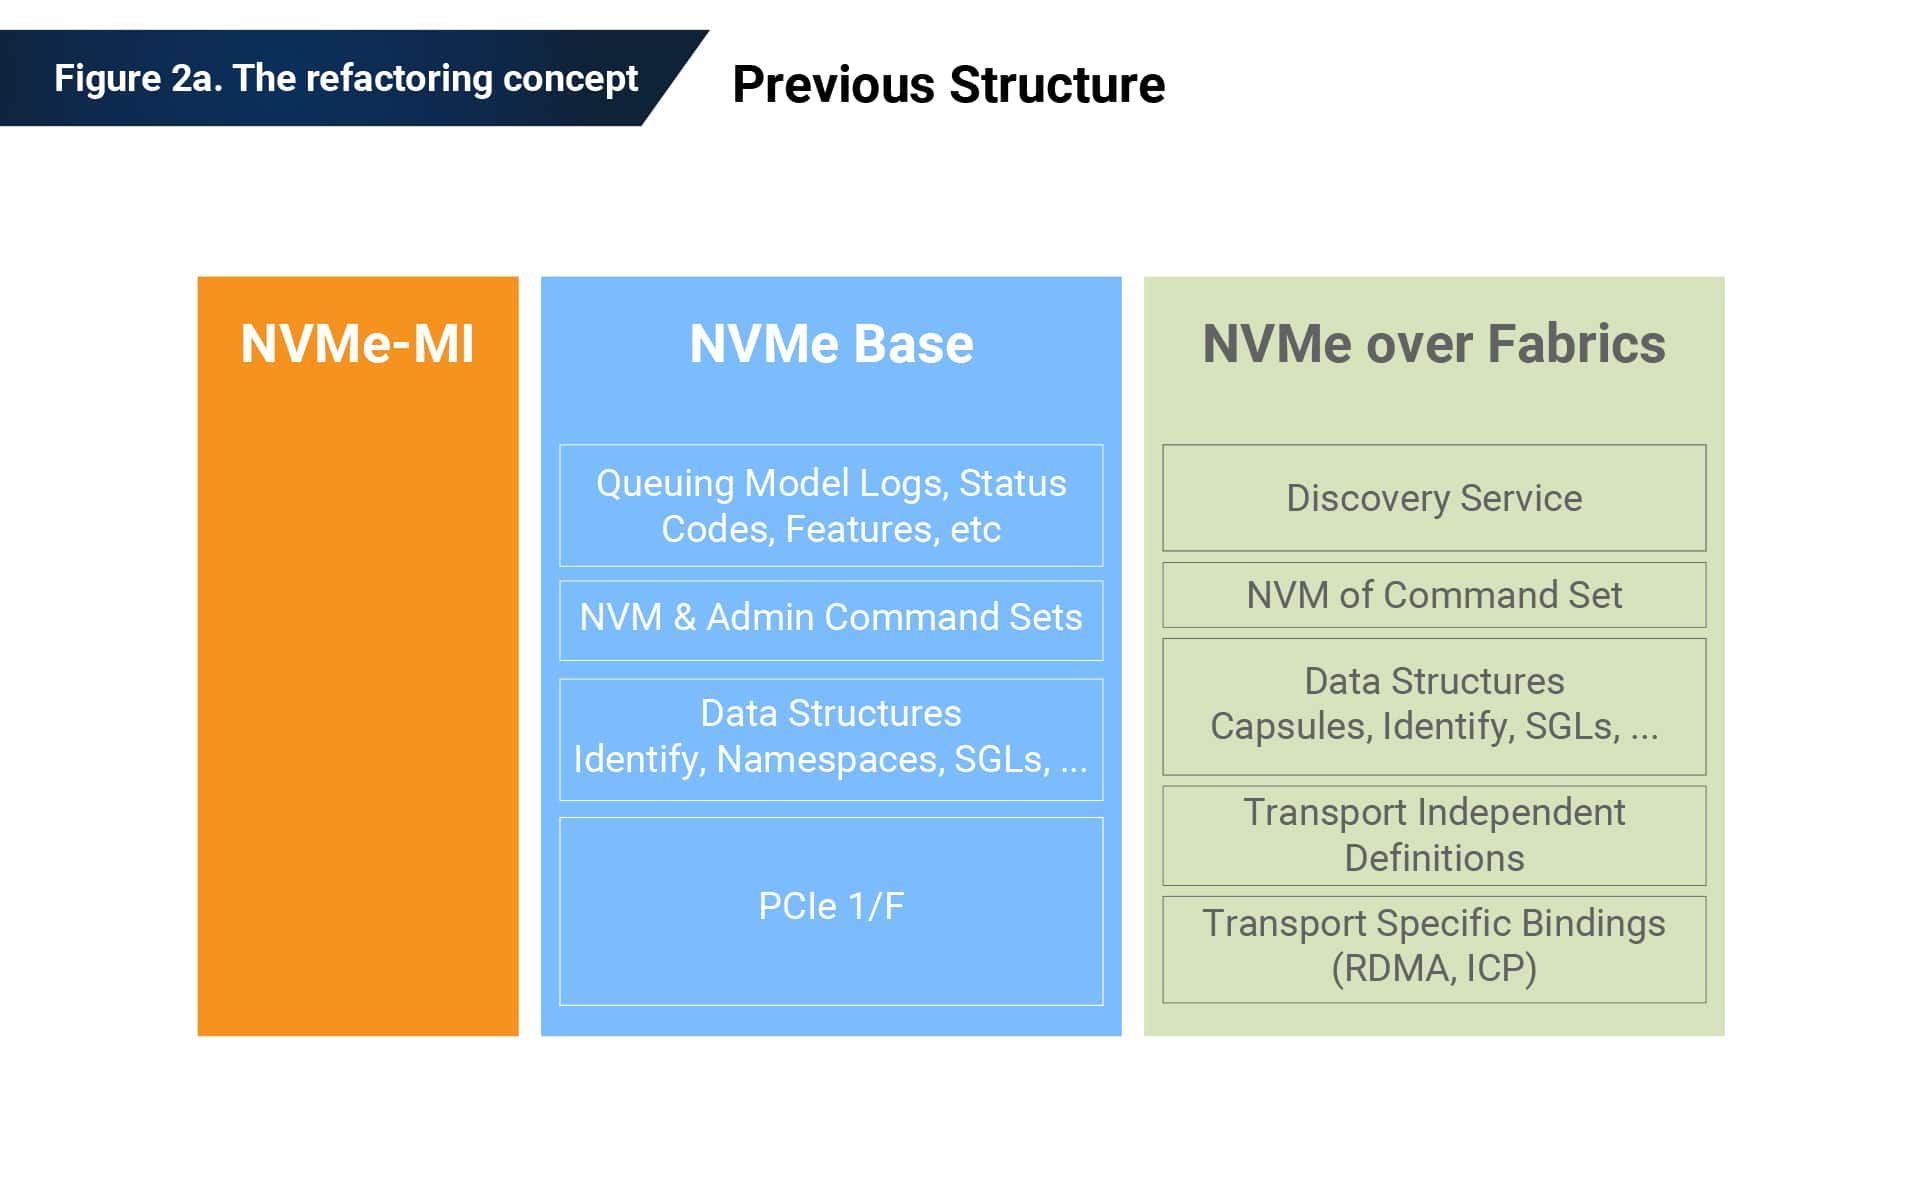 Specifications - NVM Express